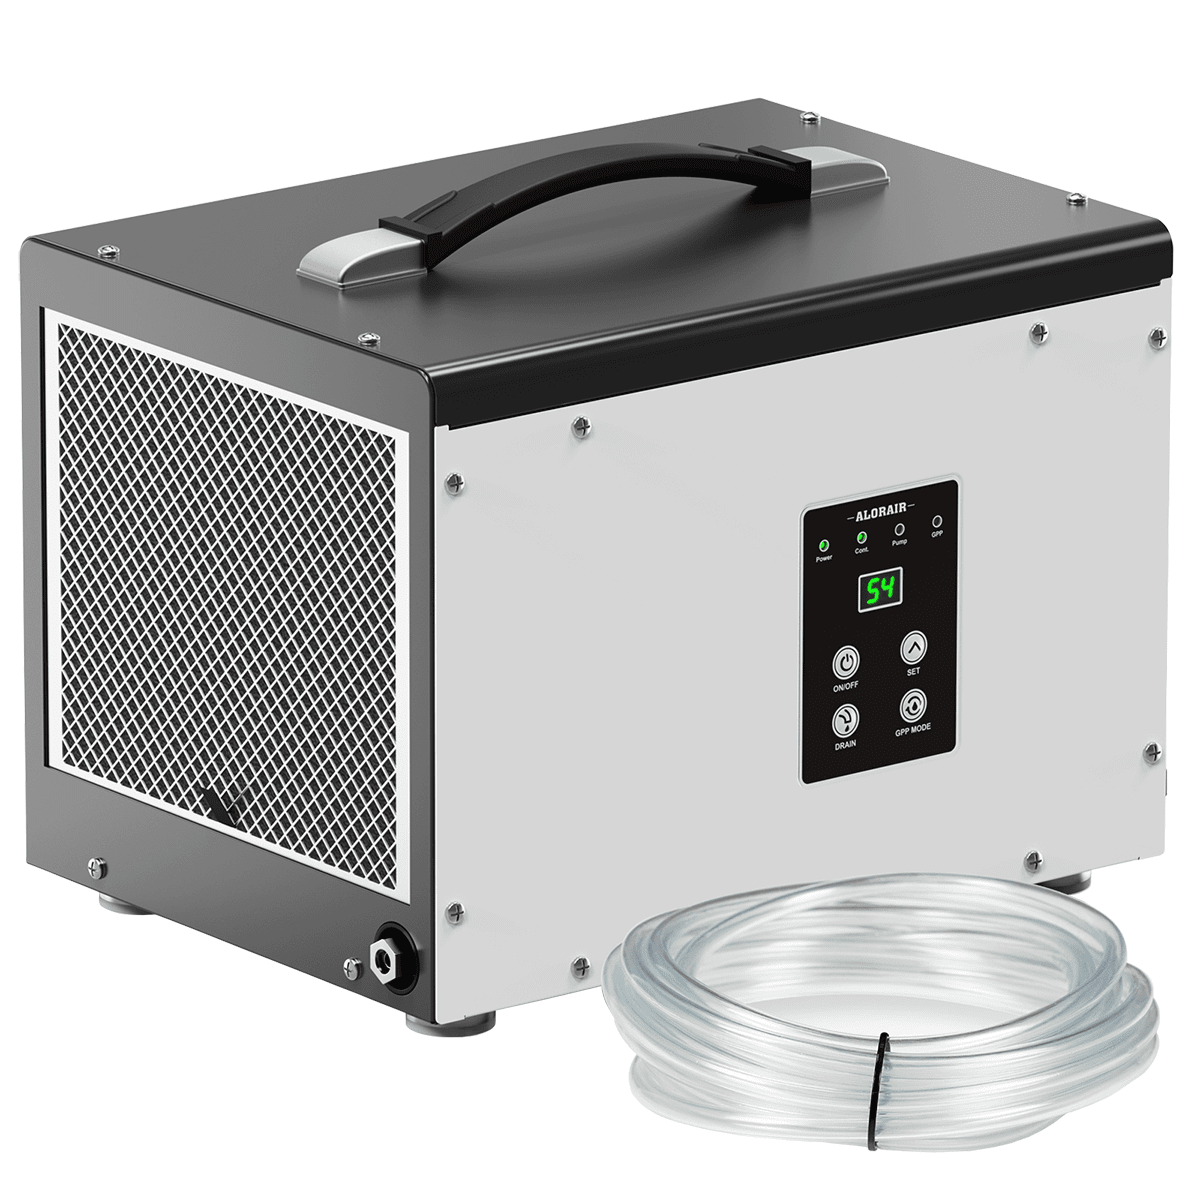 AlorAir Sentinel 35 Pint At AHAM Dehumidifier For Crawl Spaces Or Basements Up To 1,000 Sq. Ft.